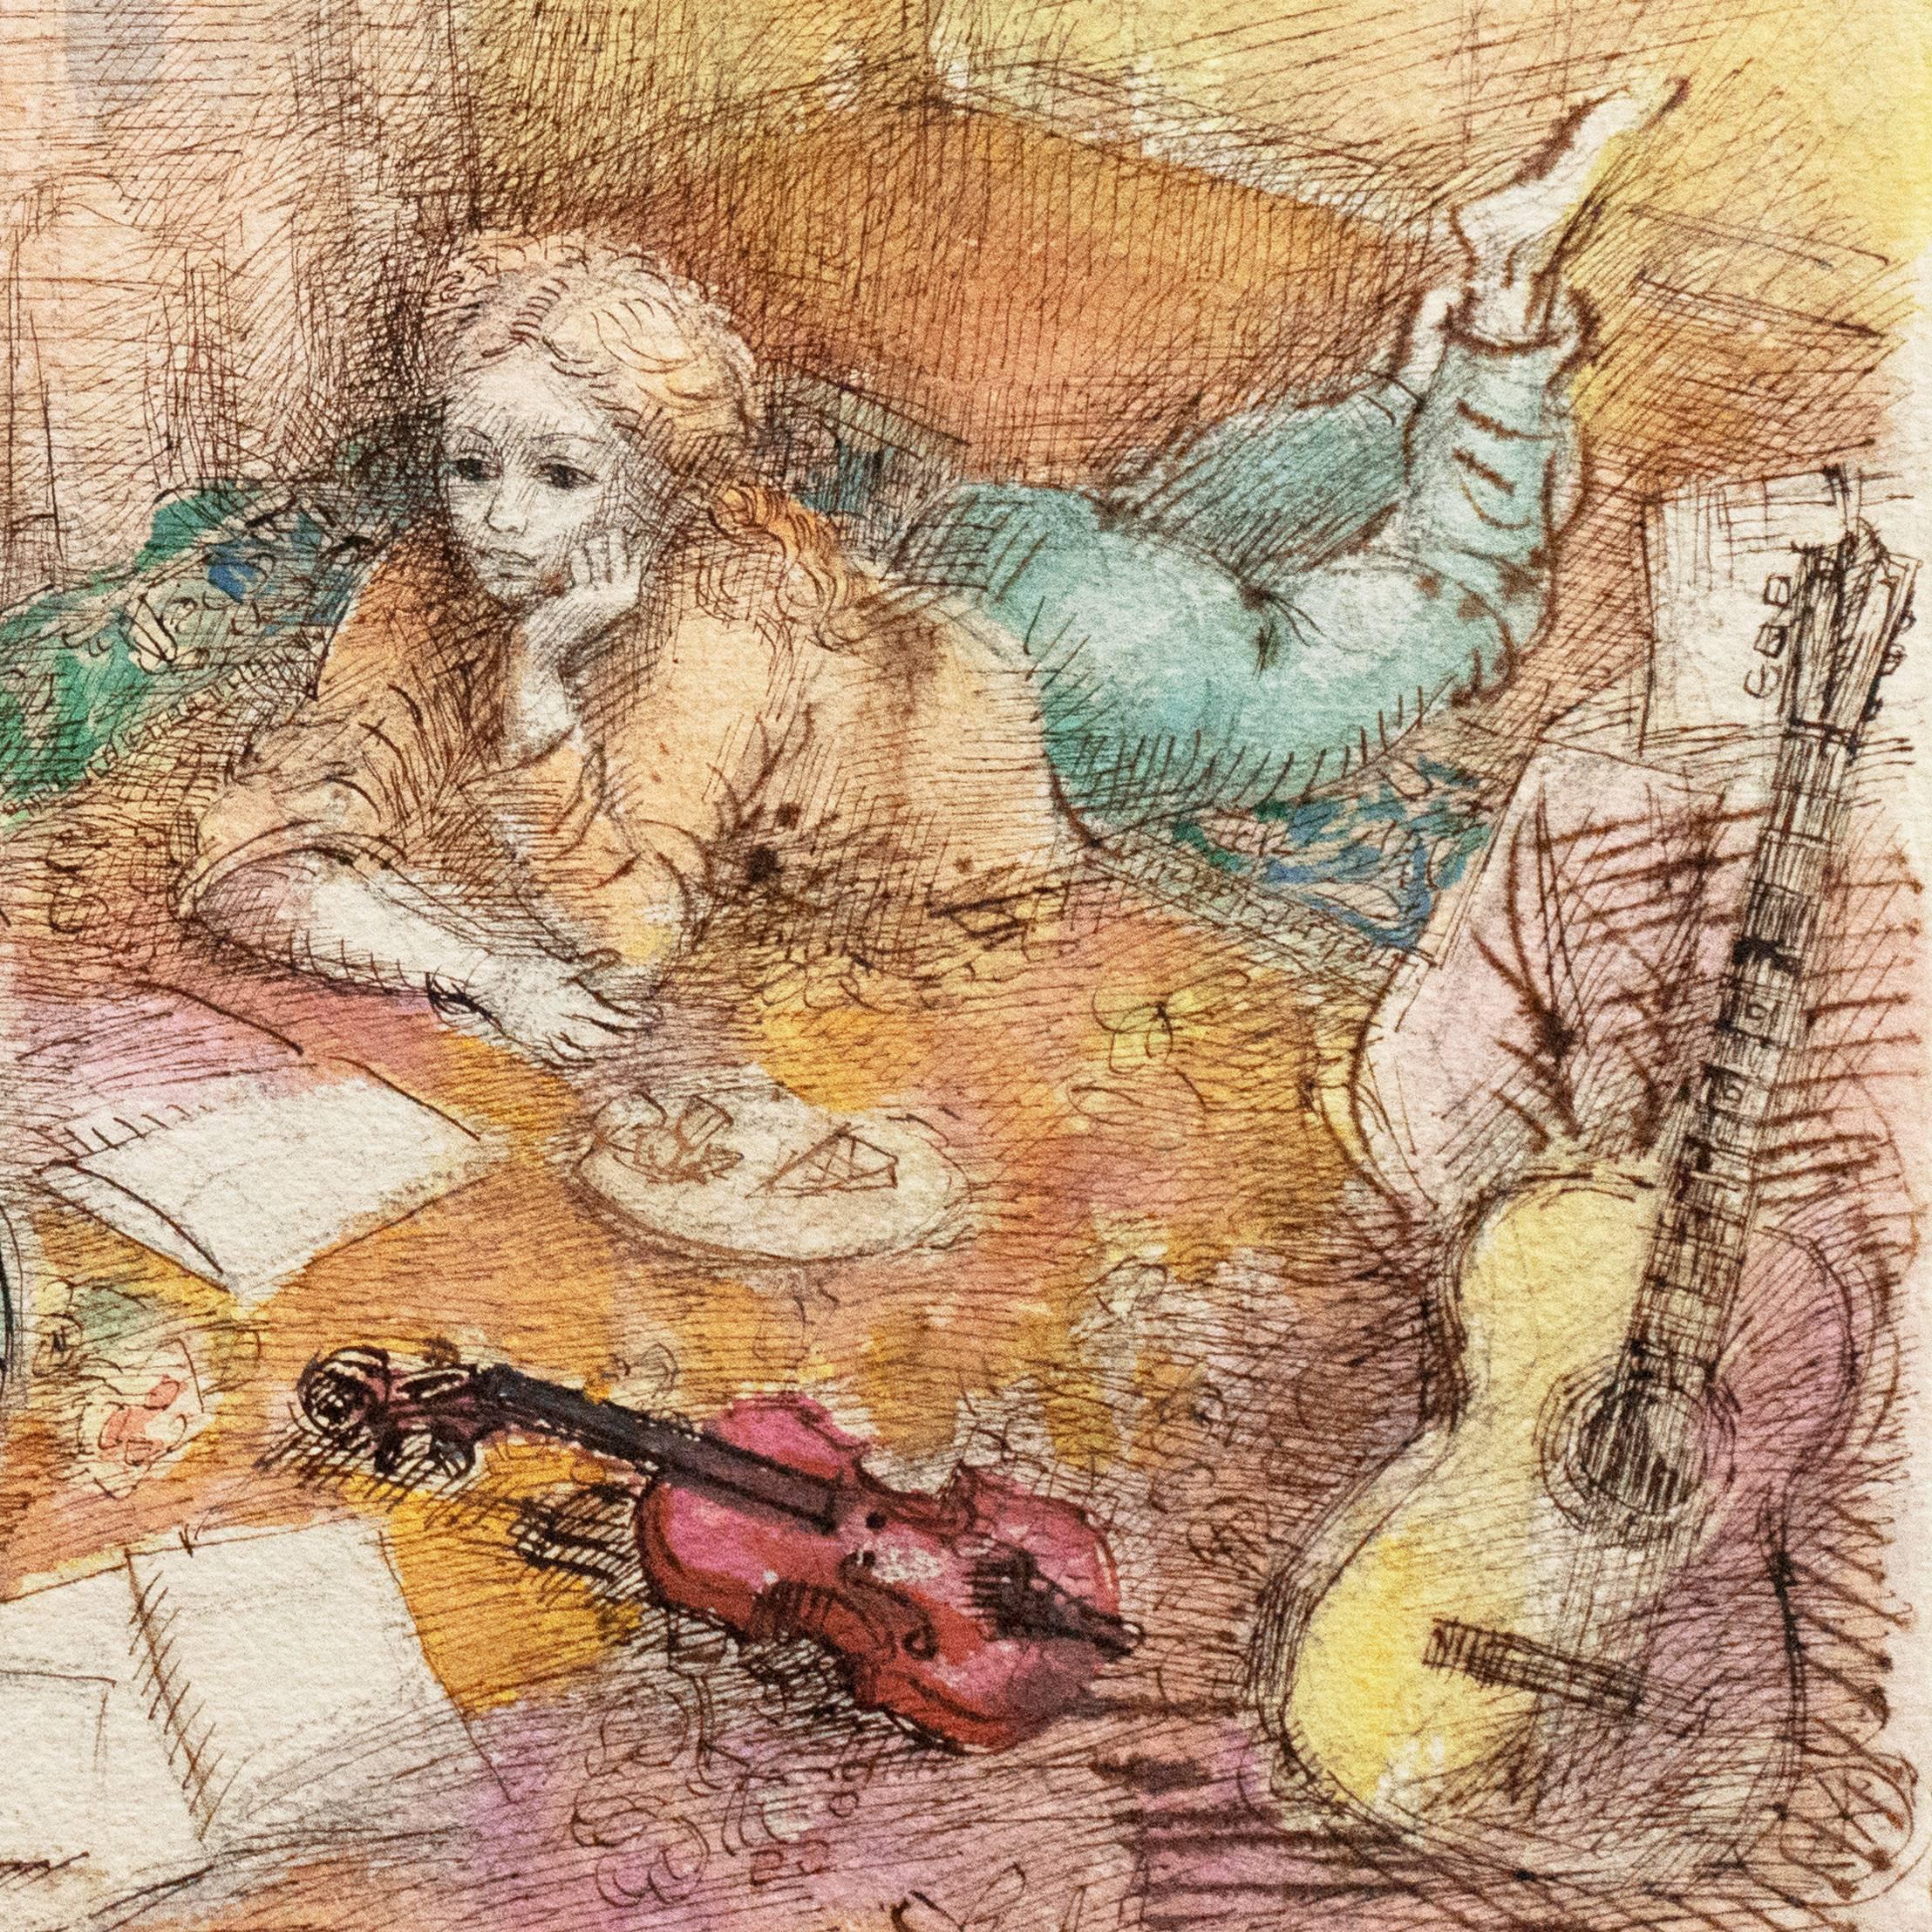 Inscribed verso 'AL.P. Moretti', titled 'Jeudi à la Maison' (Thursday at Home) and painted circa 1955.

A period watercolor interior scene showing two girls relaxing at home, surrounded by books and musical instruments. 

This well-listed French